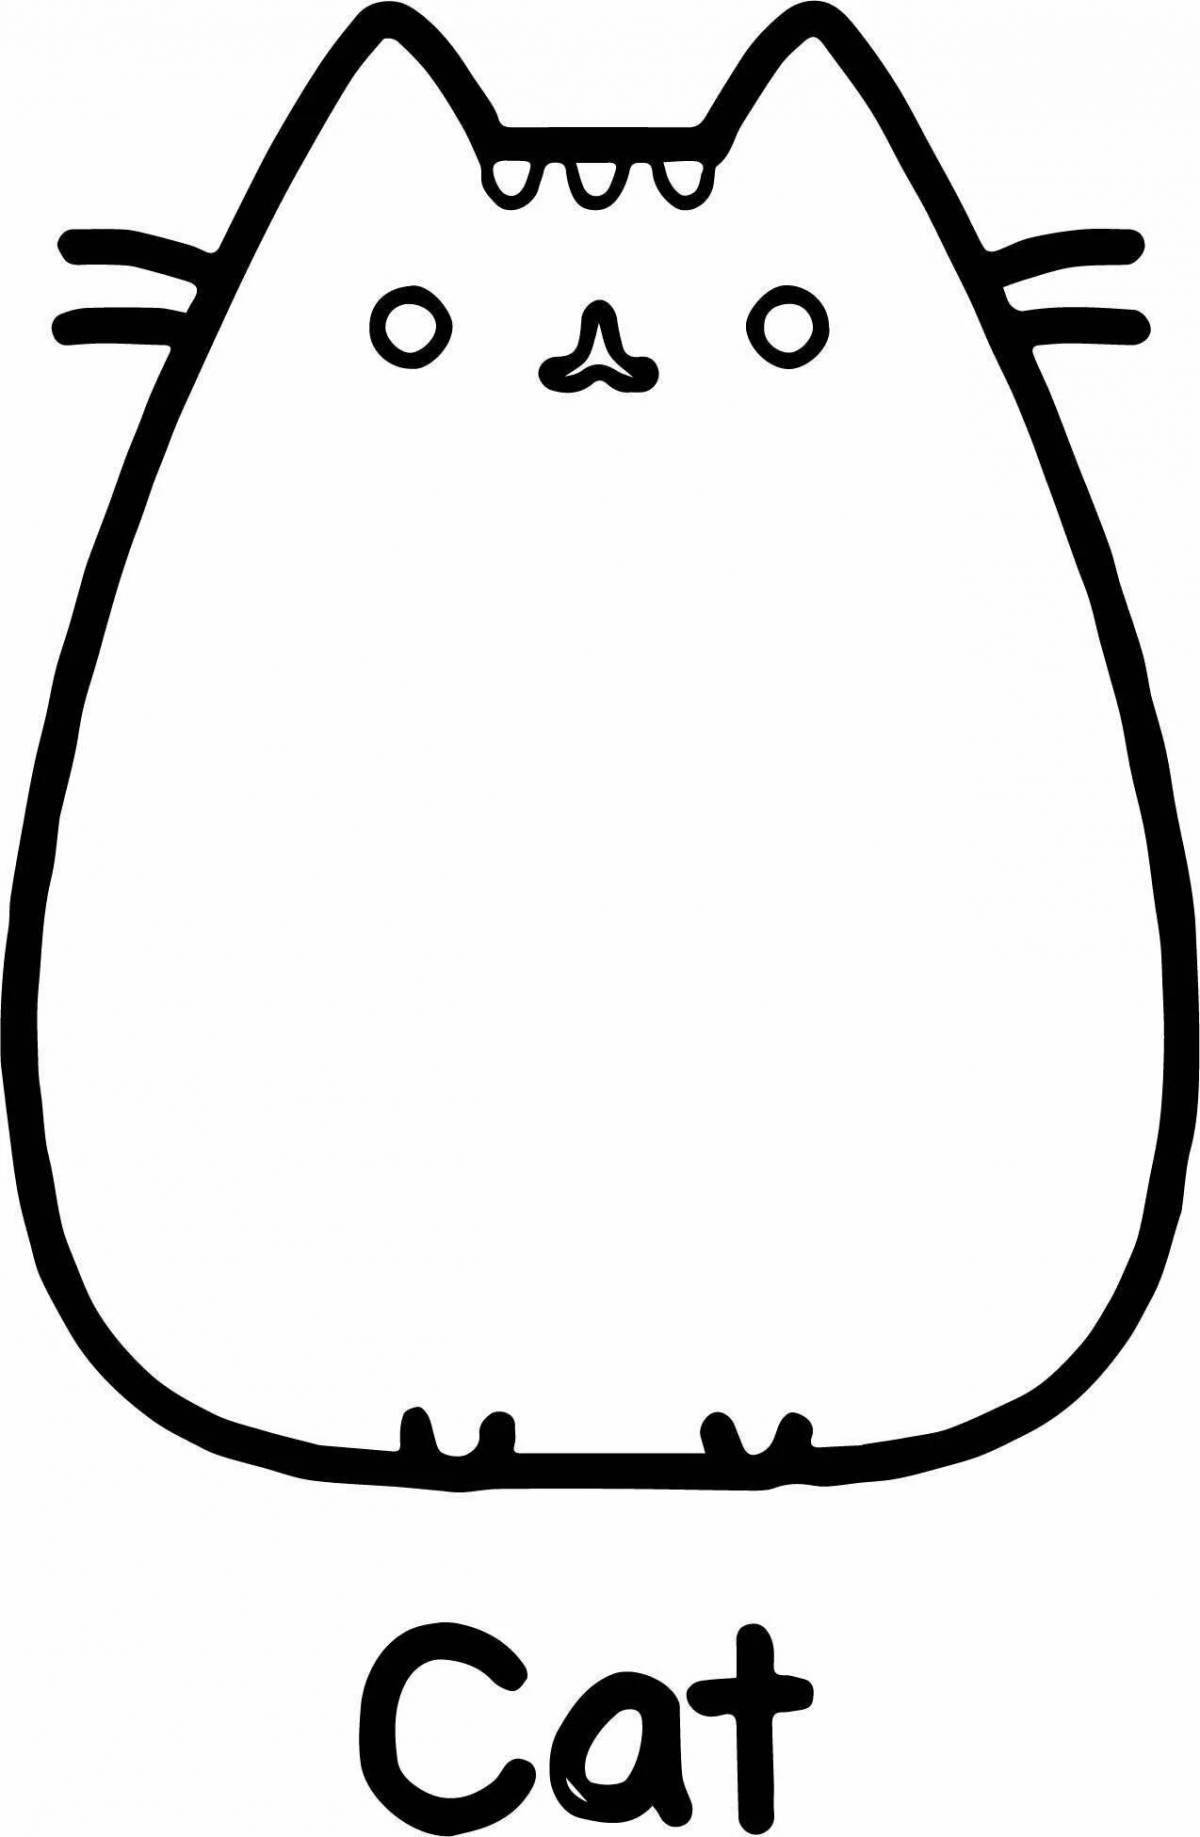 Coloring page mischievous chubby cat